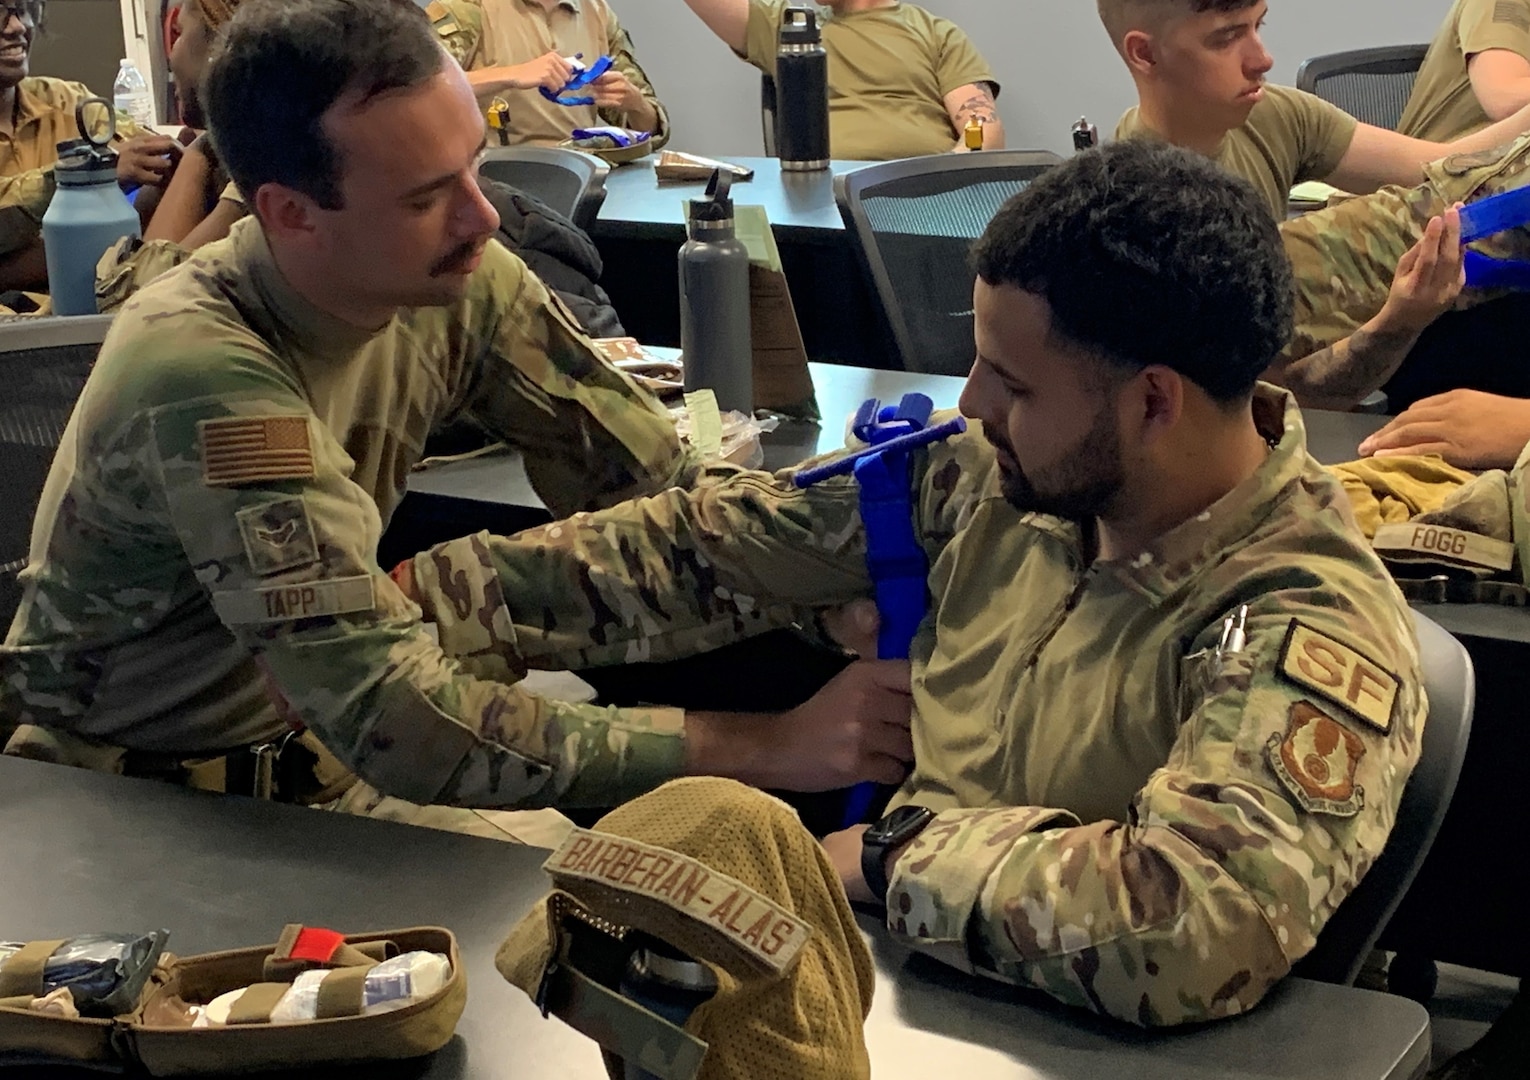 One Airman places a tourniquet around the upper arm of another Airman.